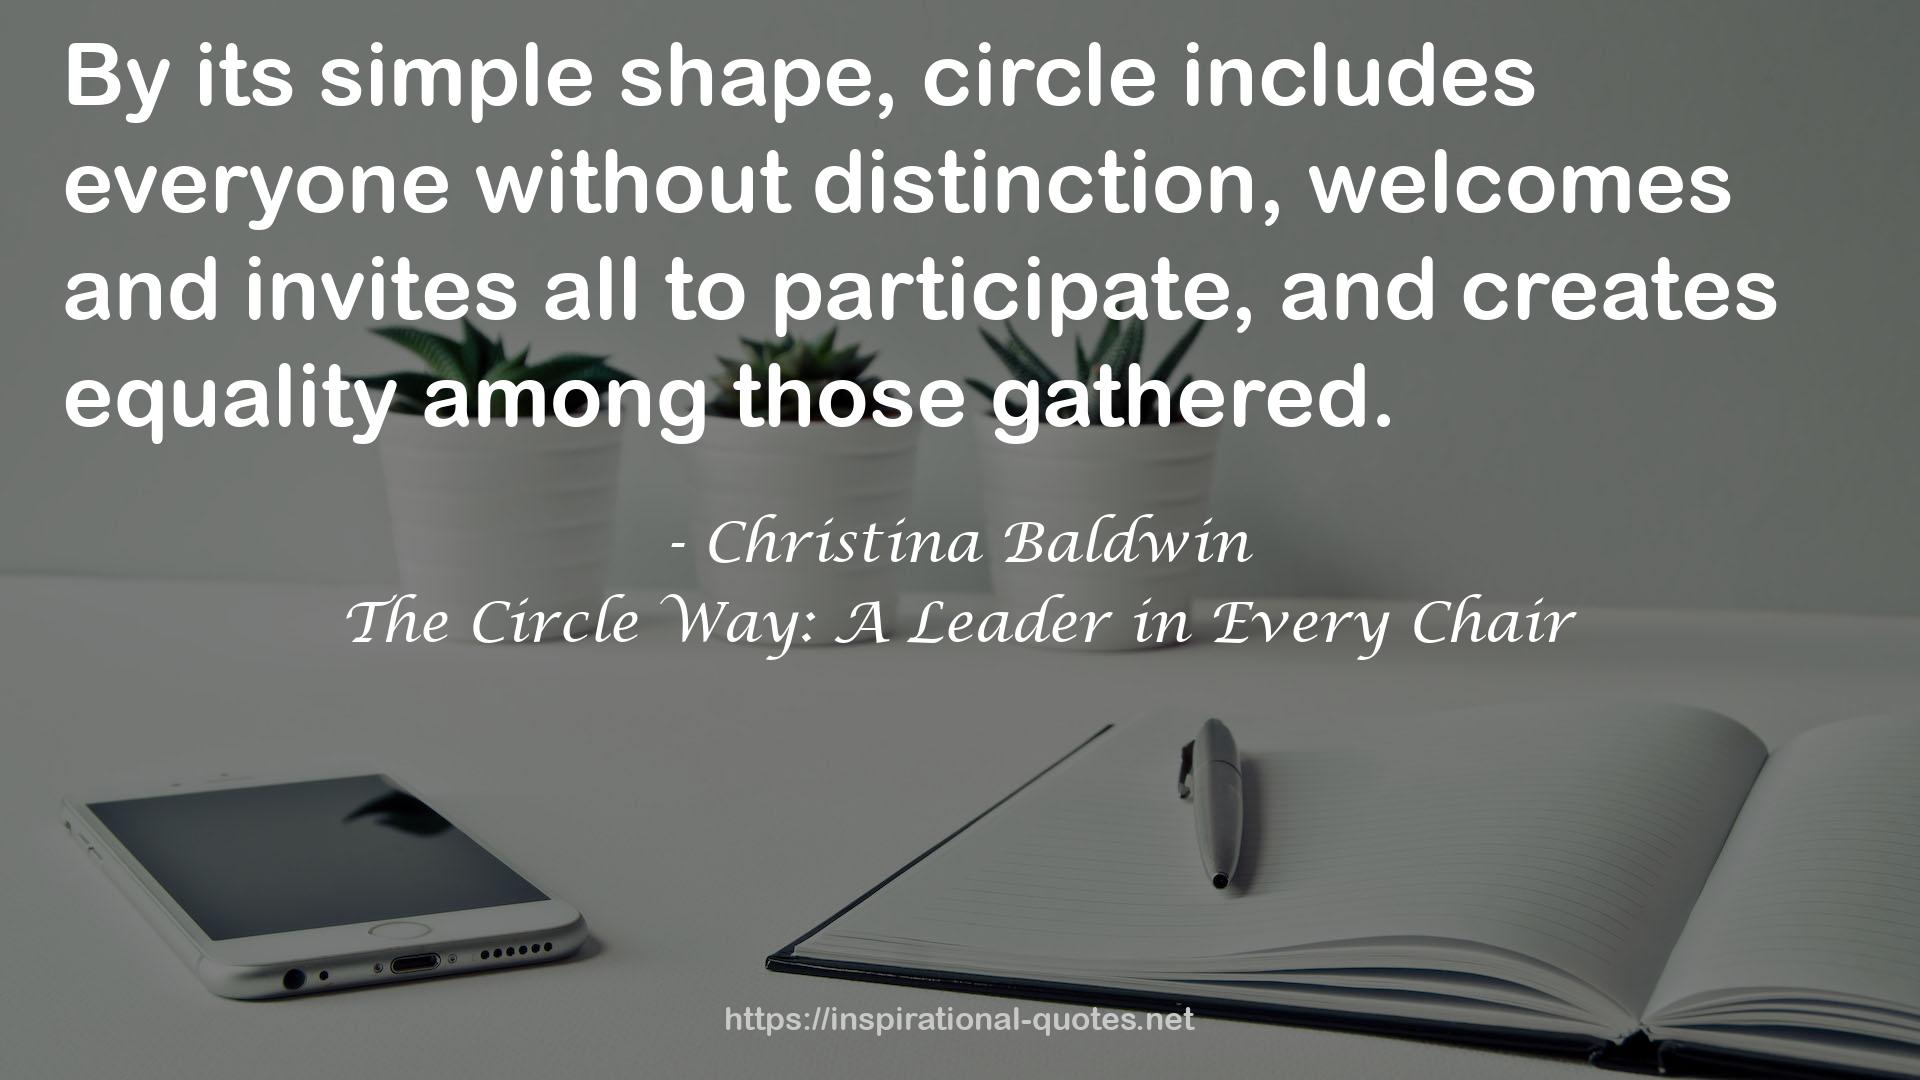 The Circle Way: A Leader in Every Chair QUOTES